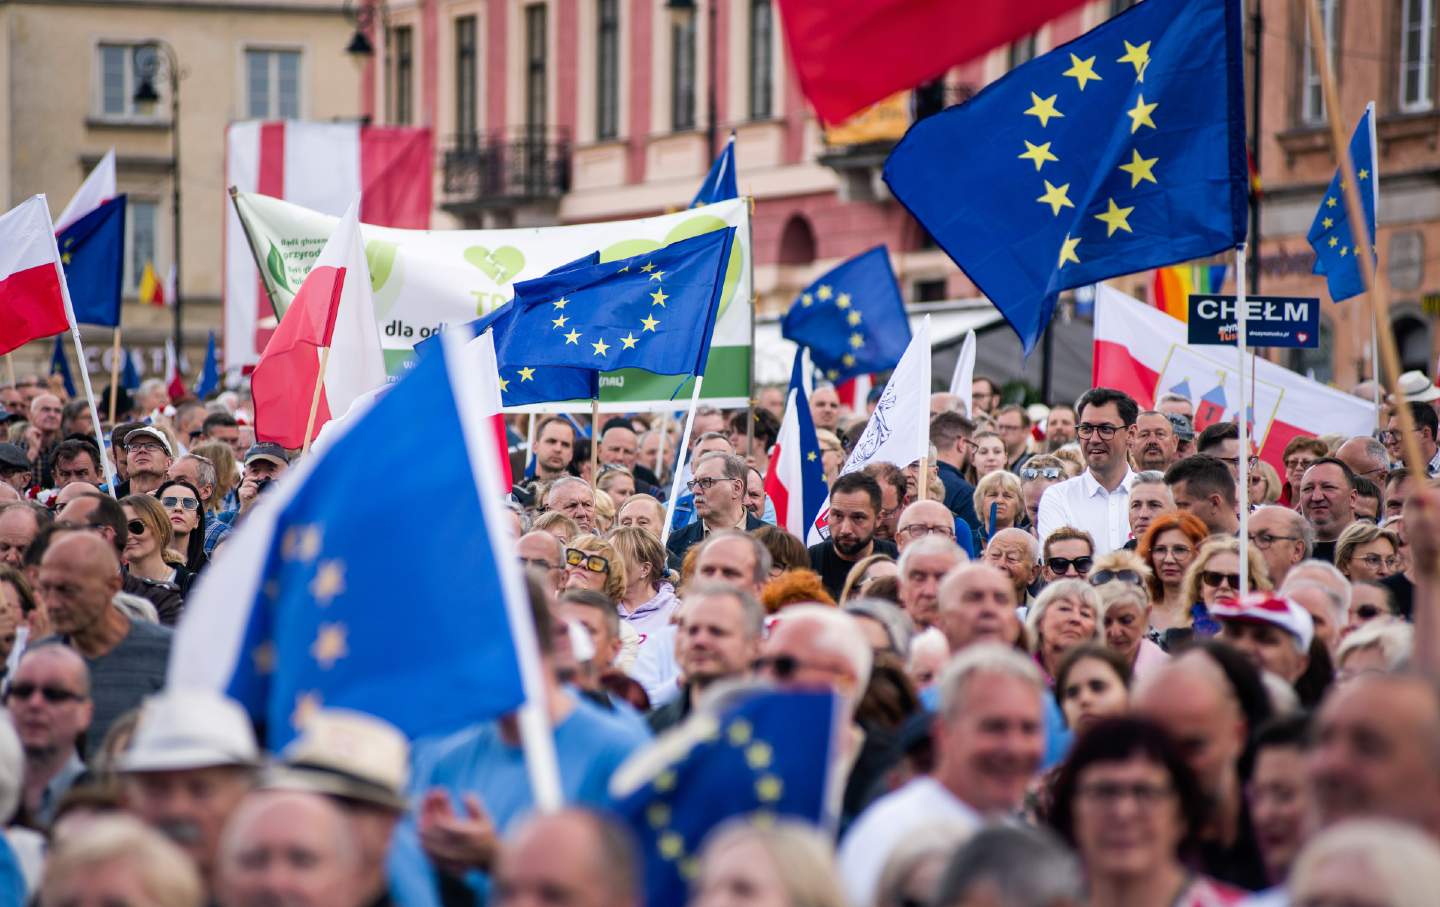 People wave Polish and EU flags during a pro-EU rally organized by Prime Minister Donald Tusk ahead of European Parliament elections in Warsaw's Castle Square on June 4, 2024.